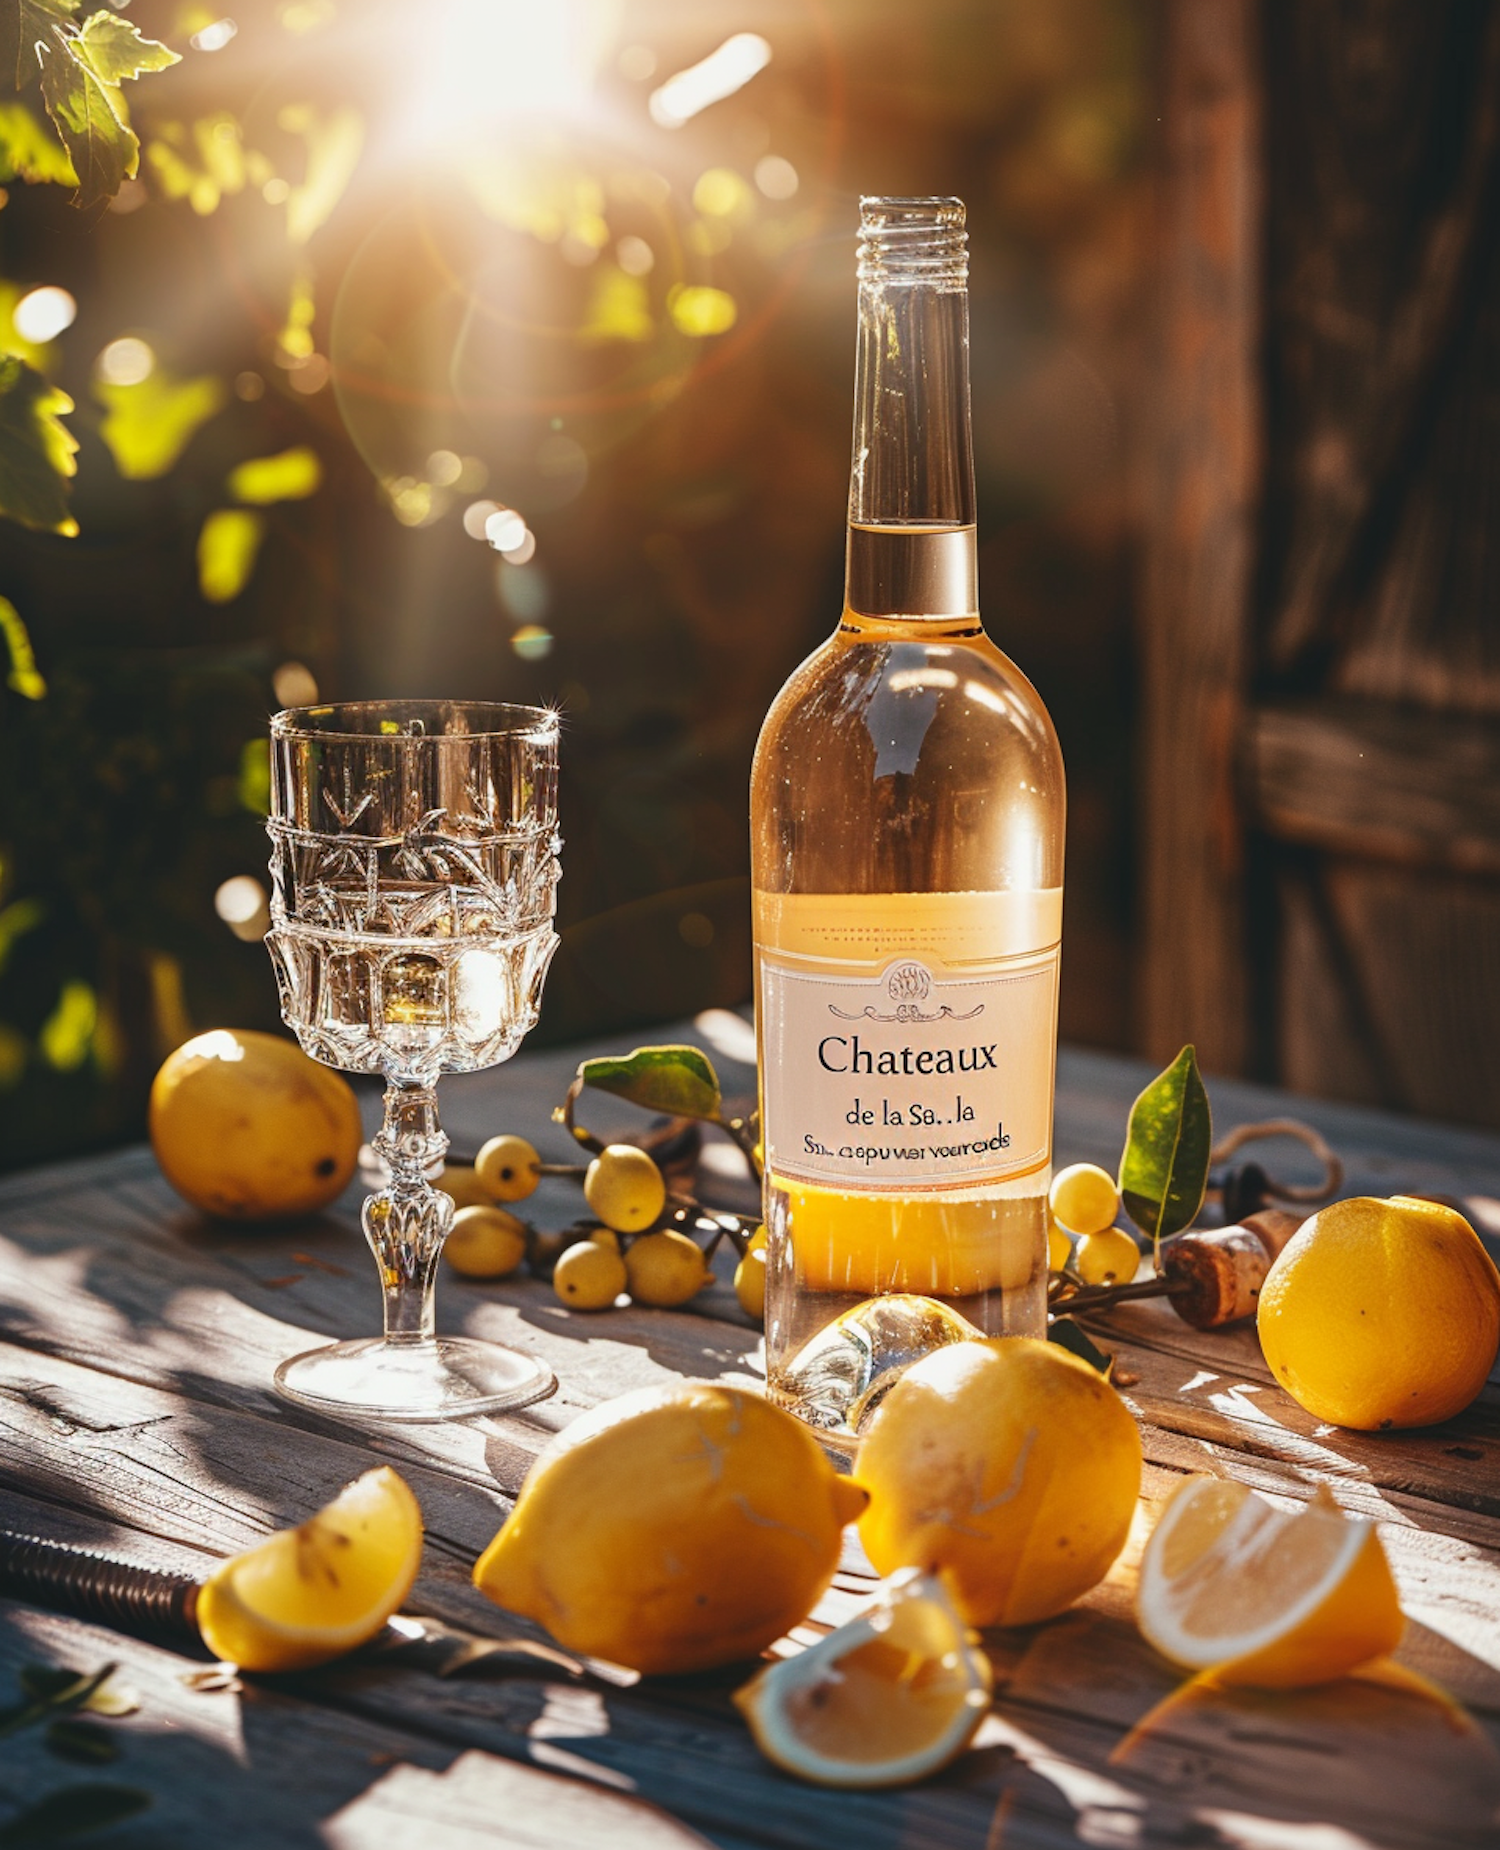 Rustic Outdoor Wine and Lemons Still Life